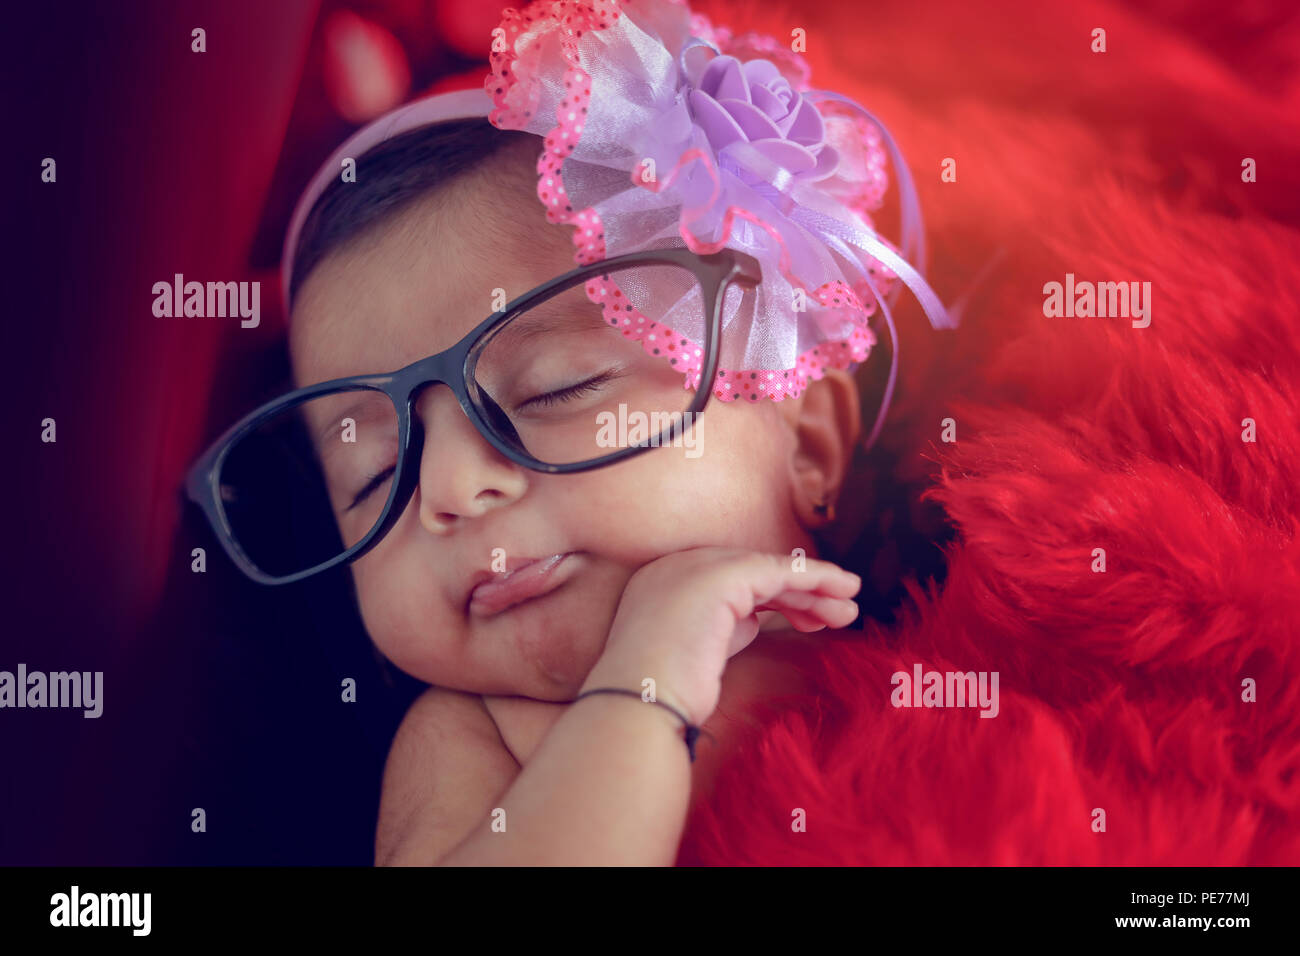 cute Indian baby girl on spectacles Stock Photo